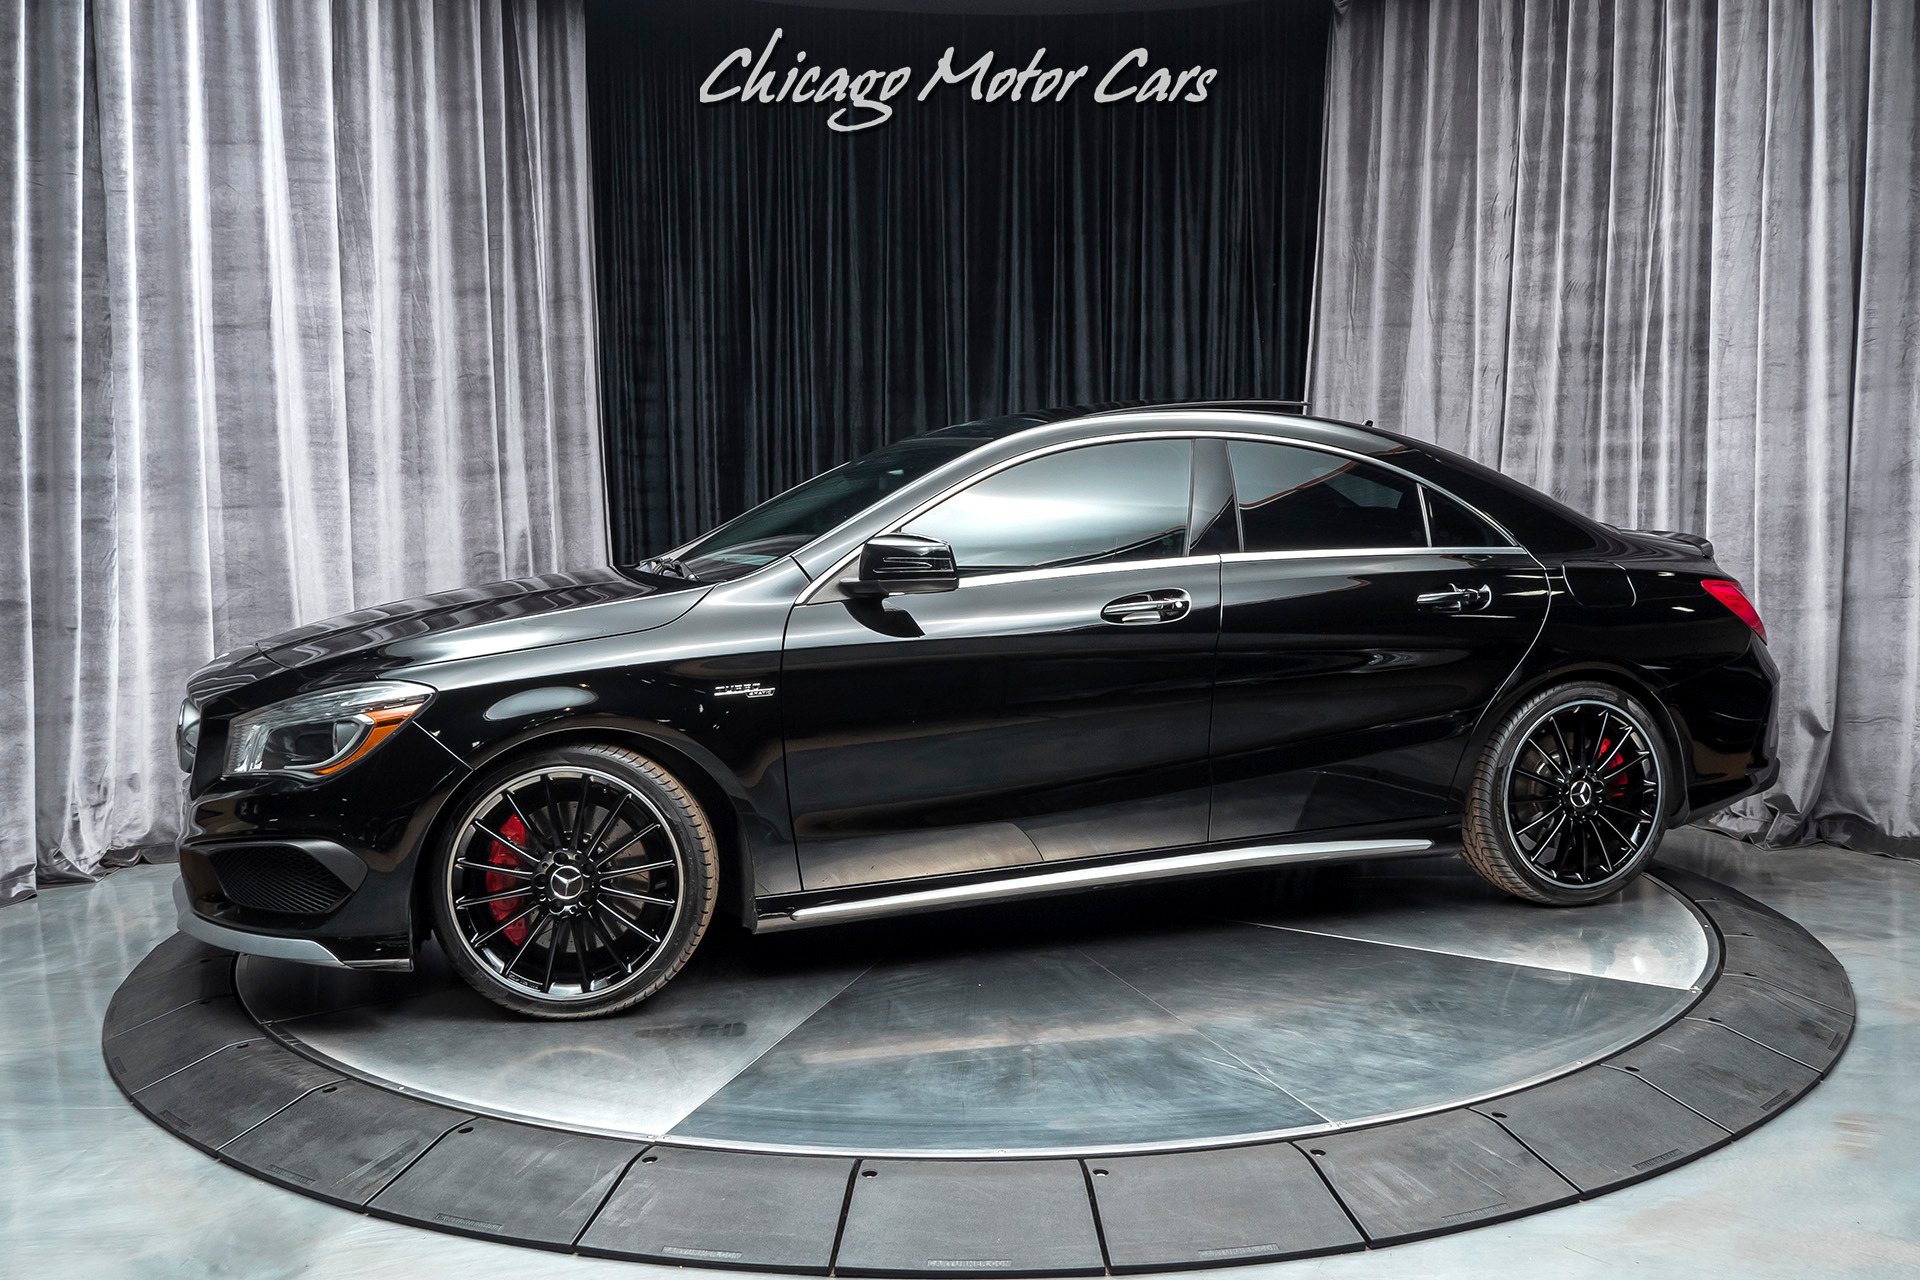 Used 2016 Mercedes-Benz CLA45 AMG Sedan MSRP $64K+ MULTIMEDIA PACKAGE! AMG  PERFORMANCE SEATS! For Sale (Special Pricing) | Chicago Motor Cars Stock  #16666